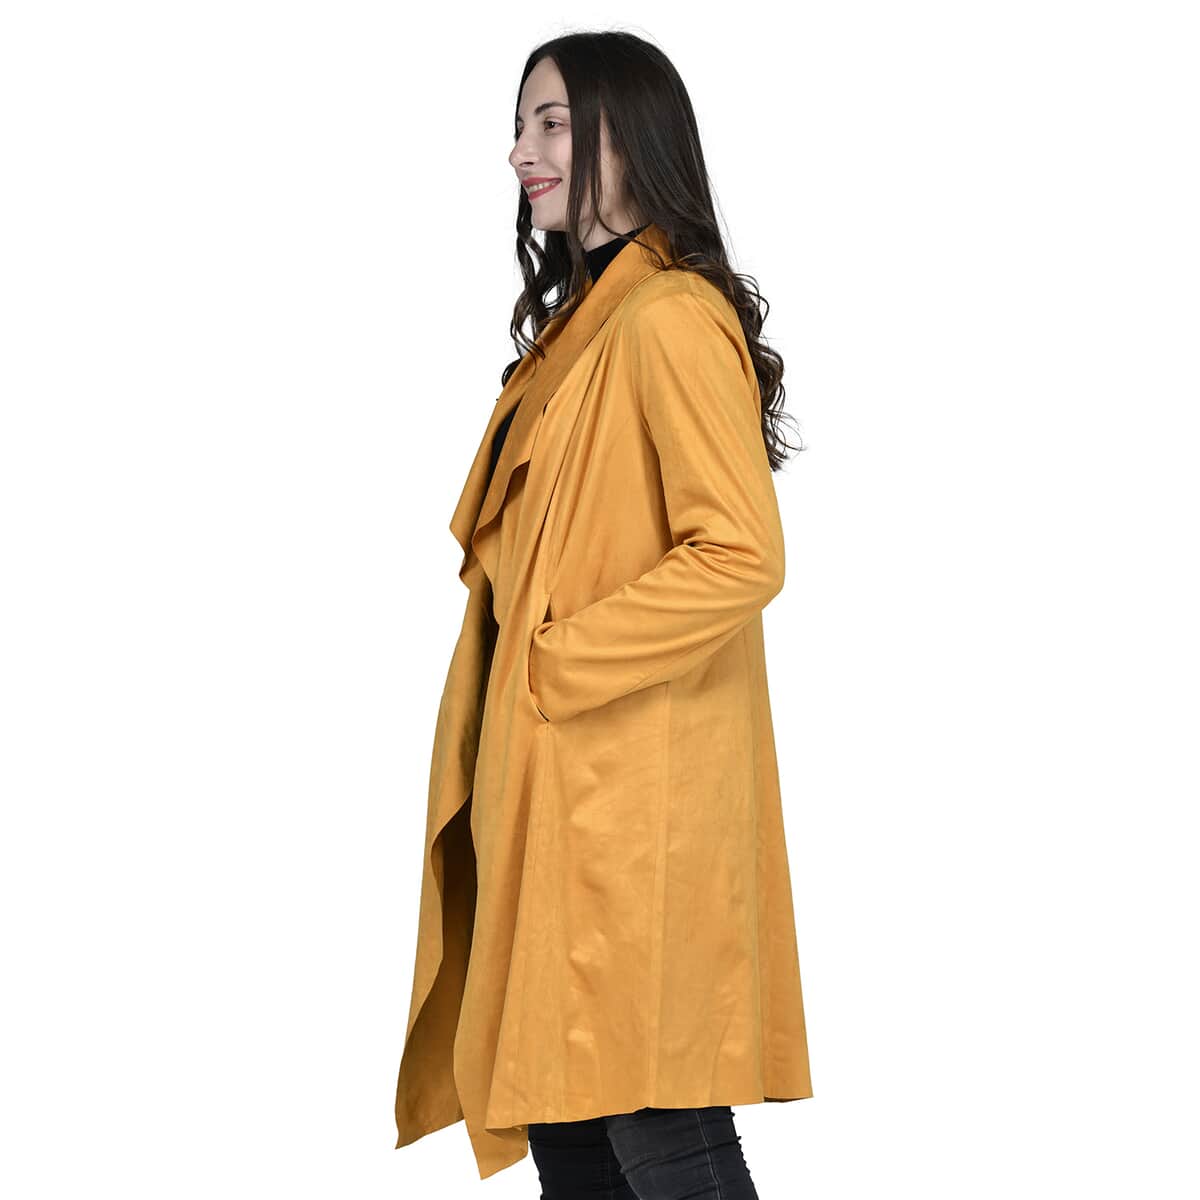 Passage Gold Faux Suede Long Waterfall Open Front Jacket For Ladies -M, Jacket for Women, Long Coat Jacket for Women, Womens Coats image number 2